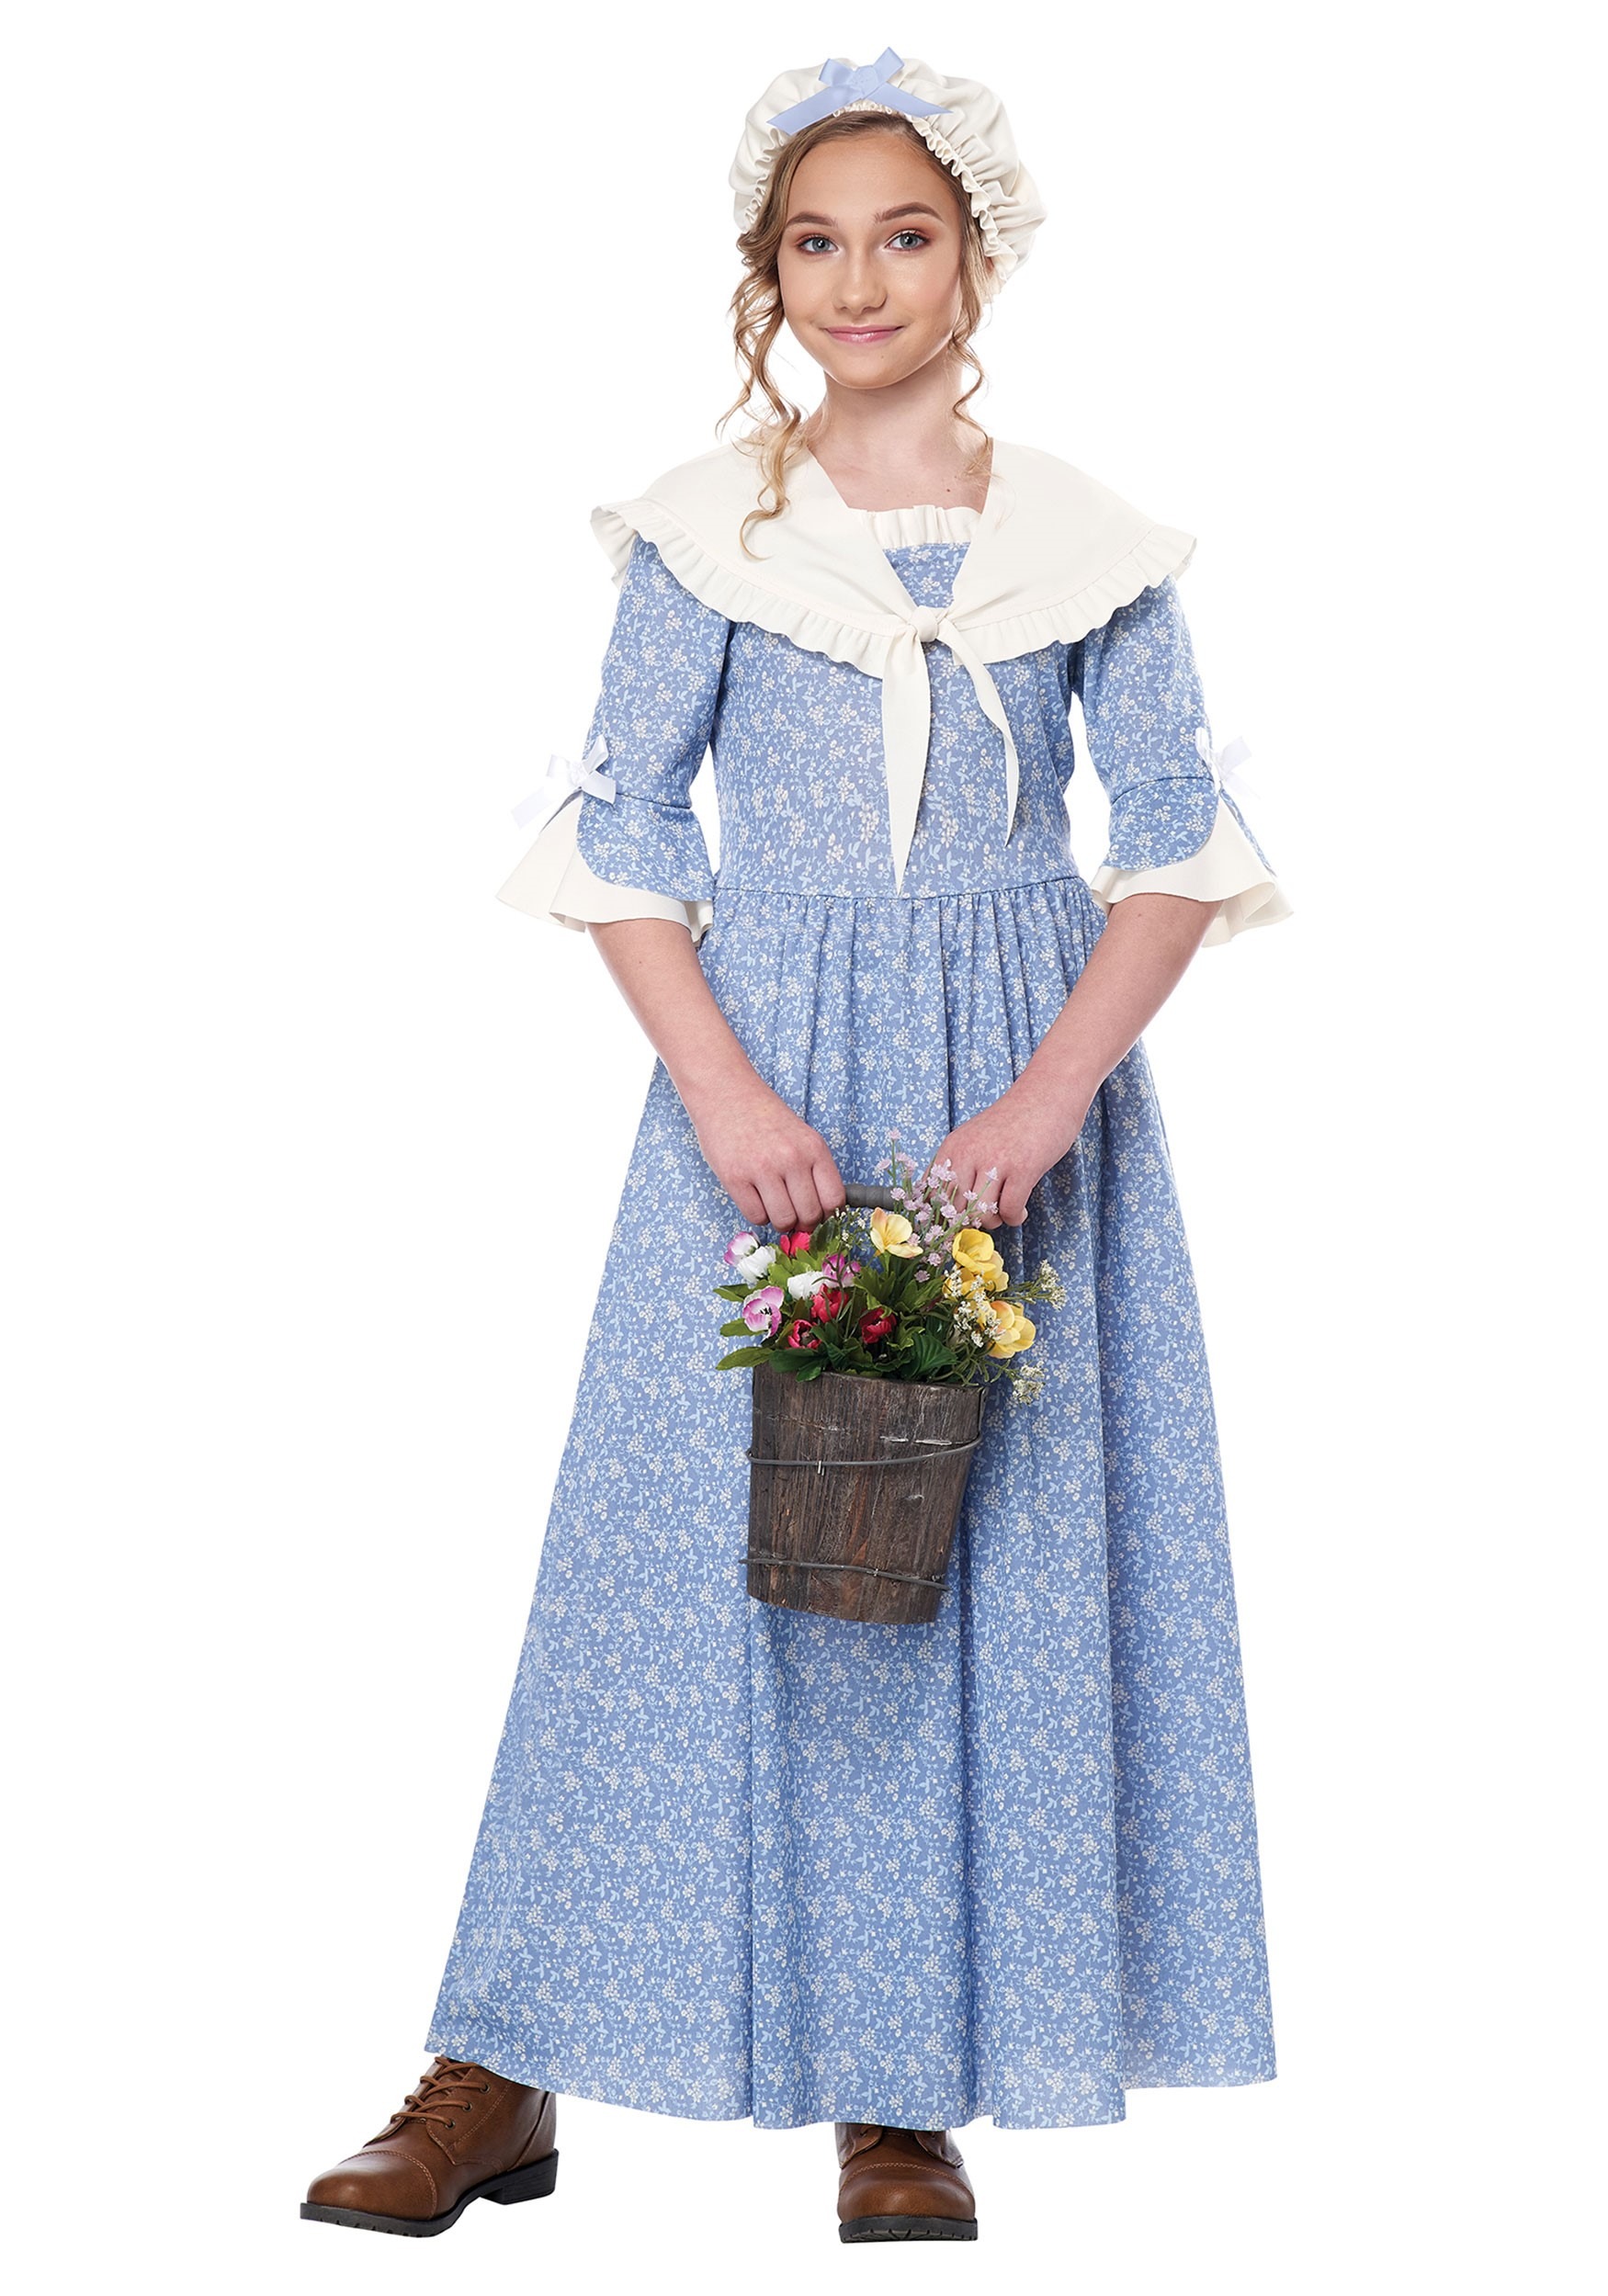 colonial-village-girl-kid-s-costume